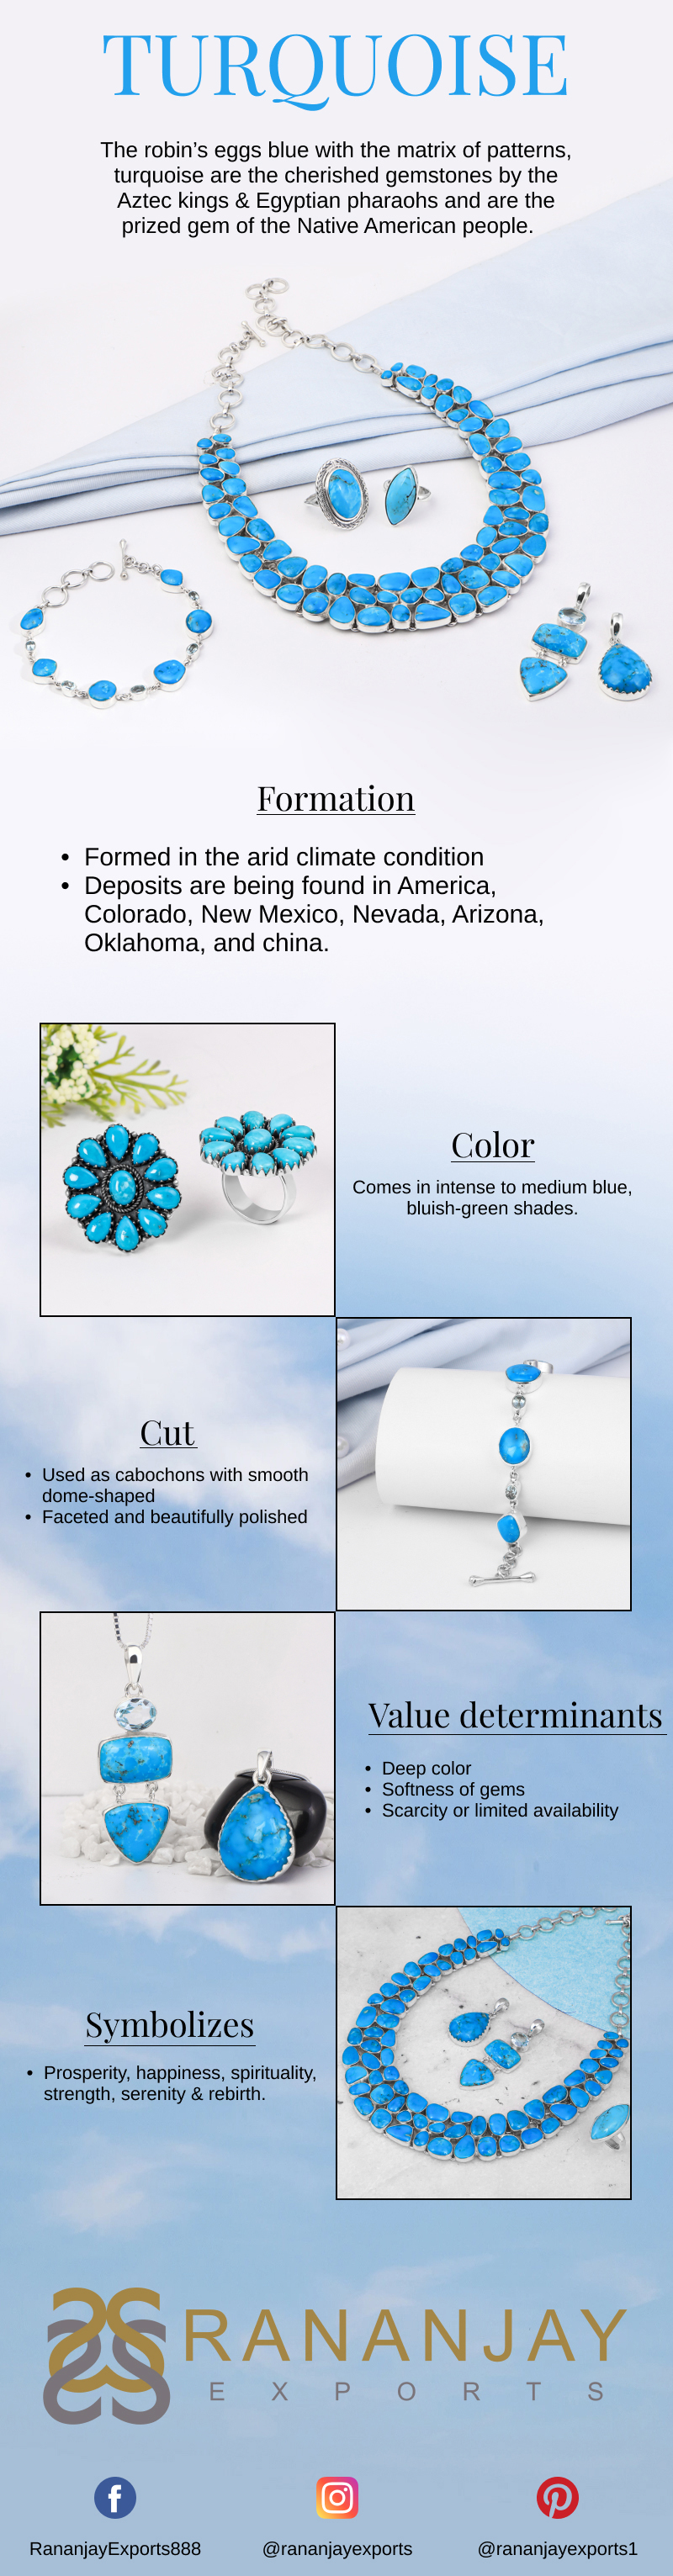 How to Style Turquoise Jewelry